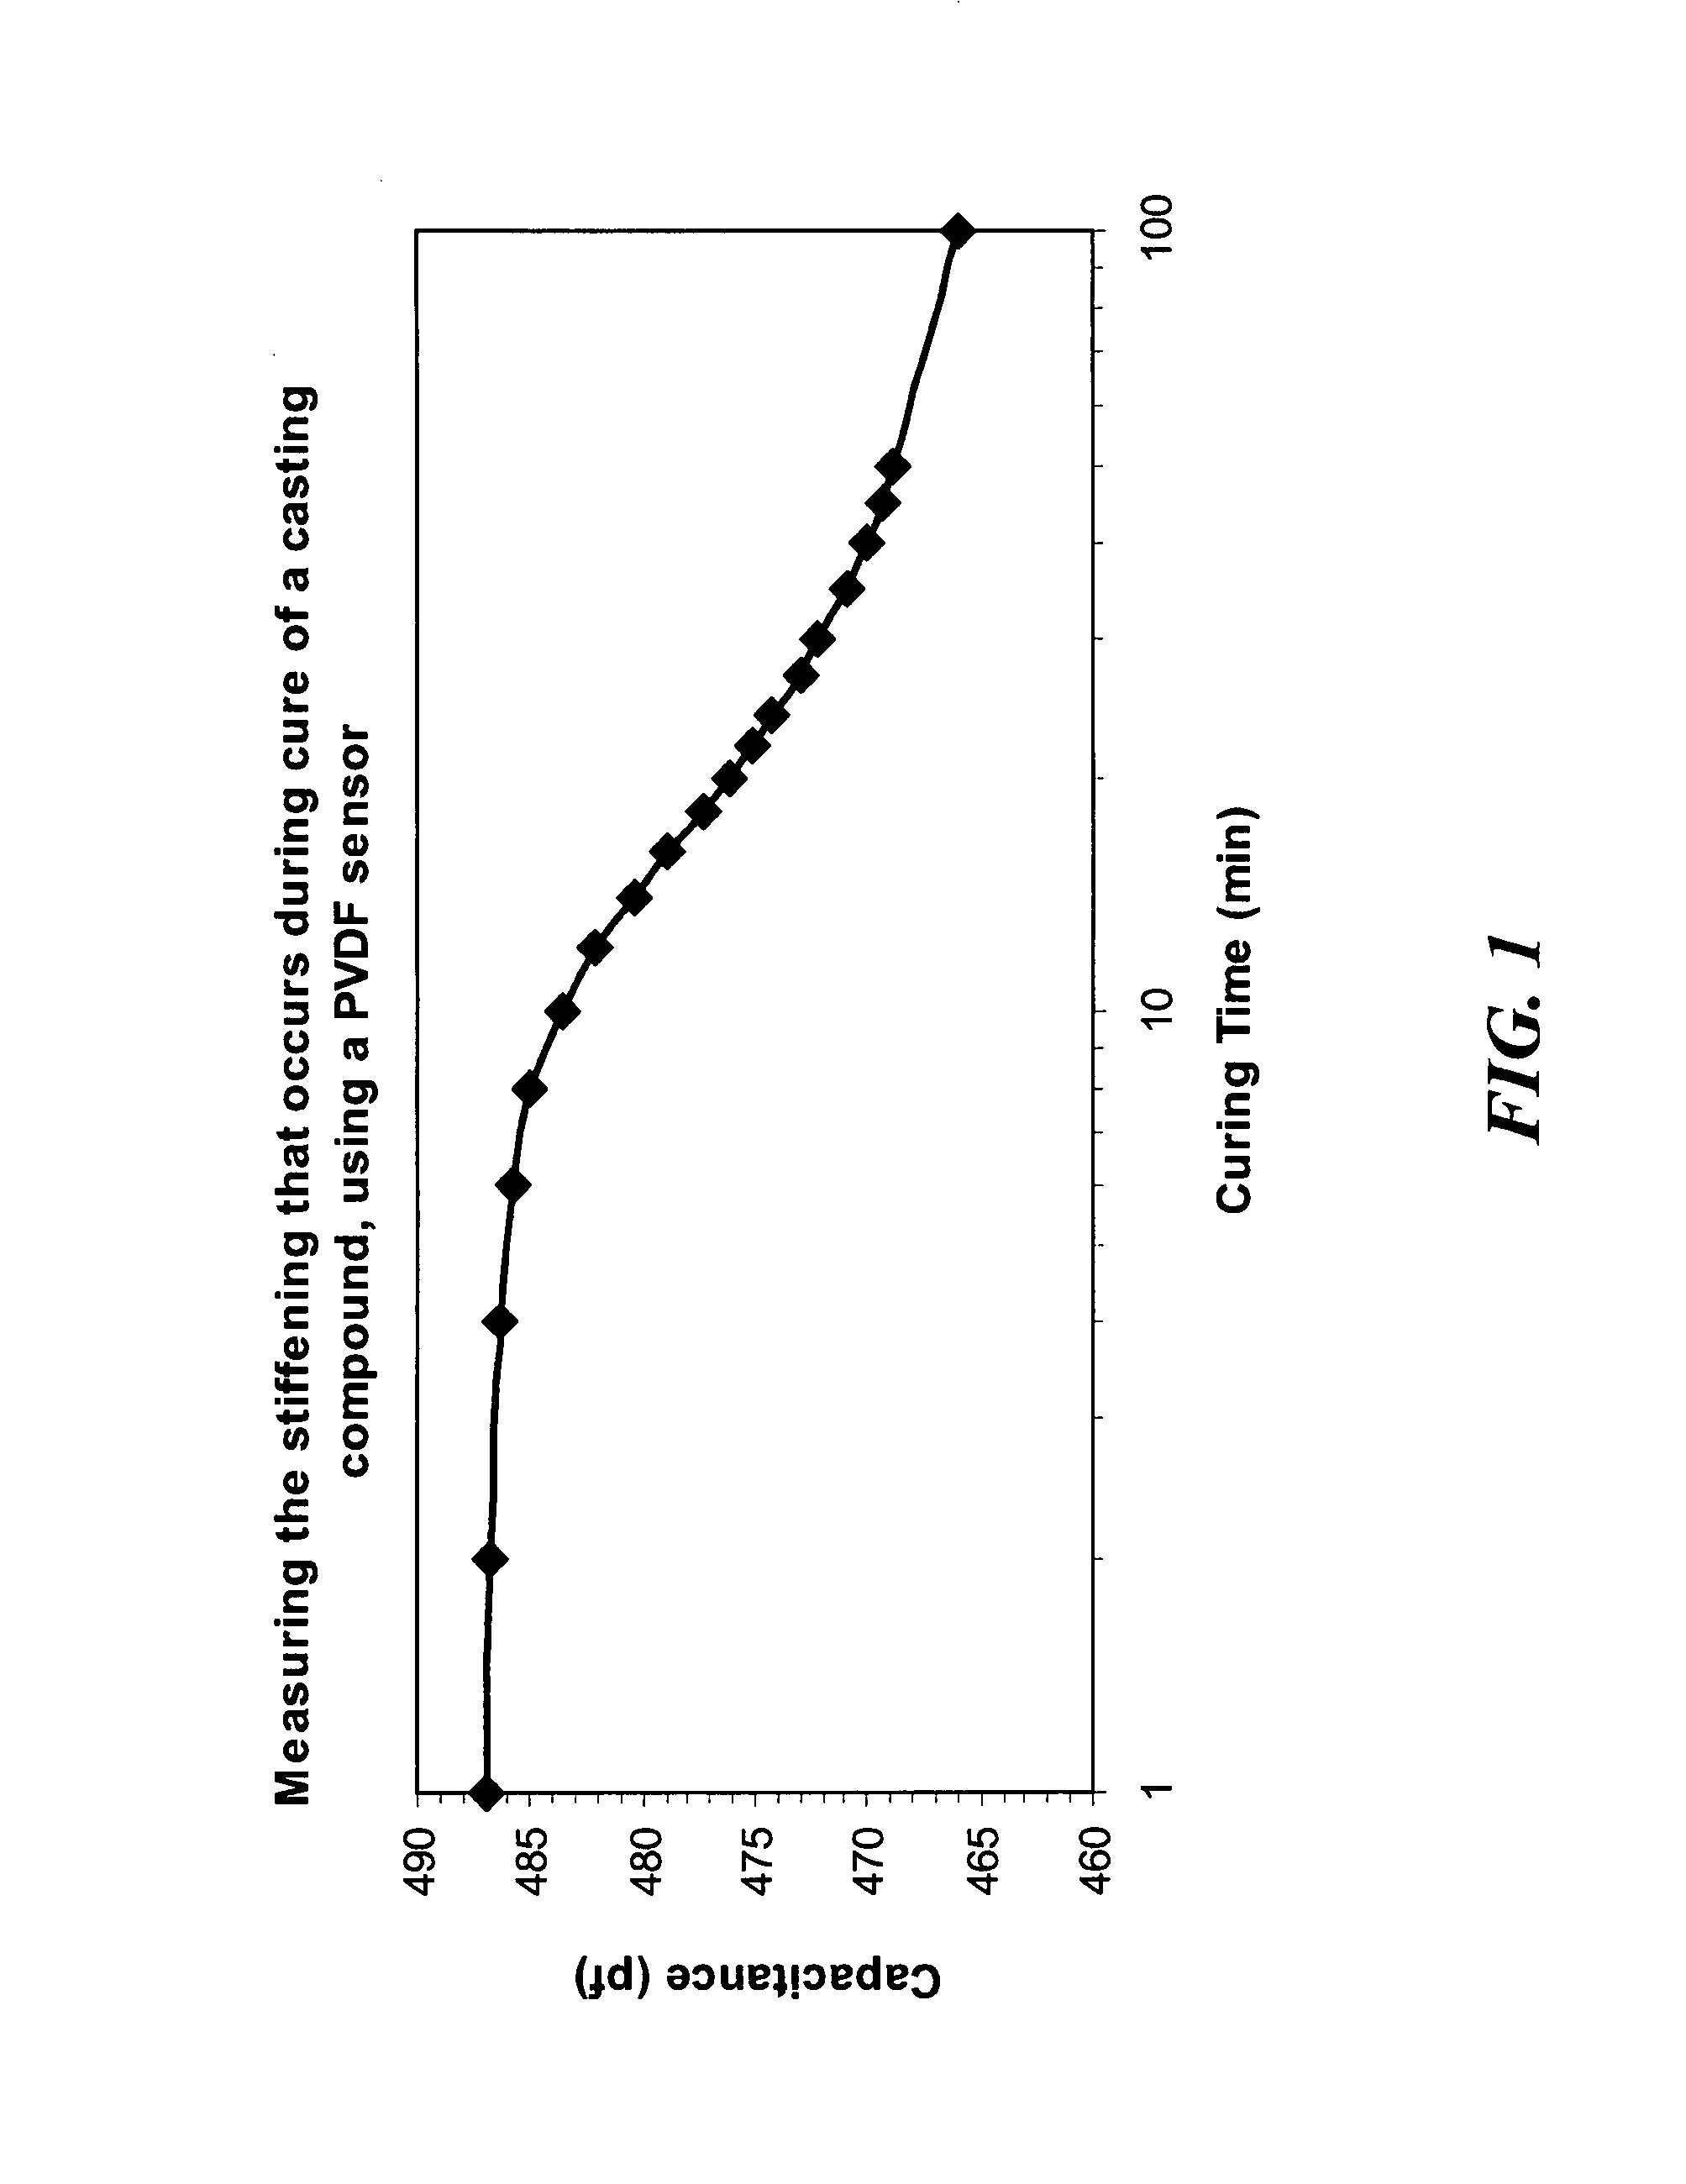 Apparatus for measuring the health of solid rocket propellant using an embedded sensor